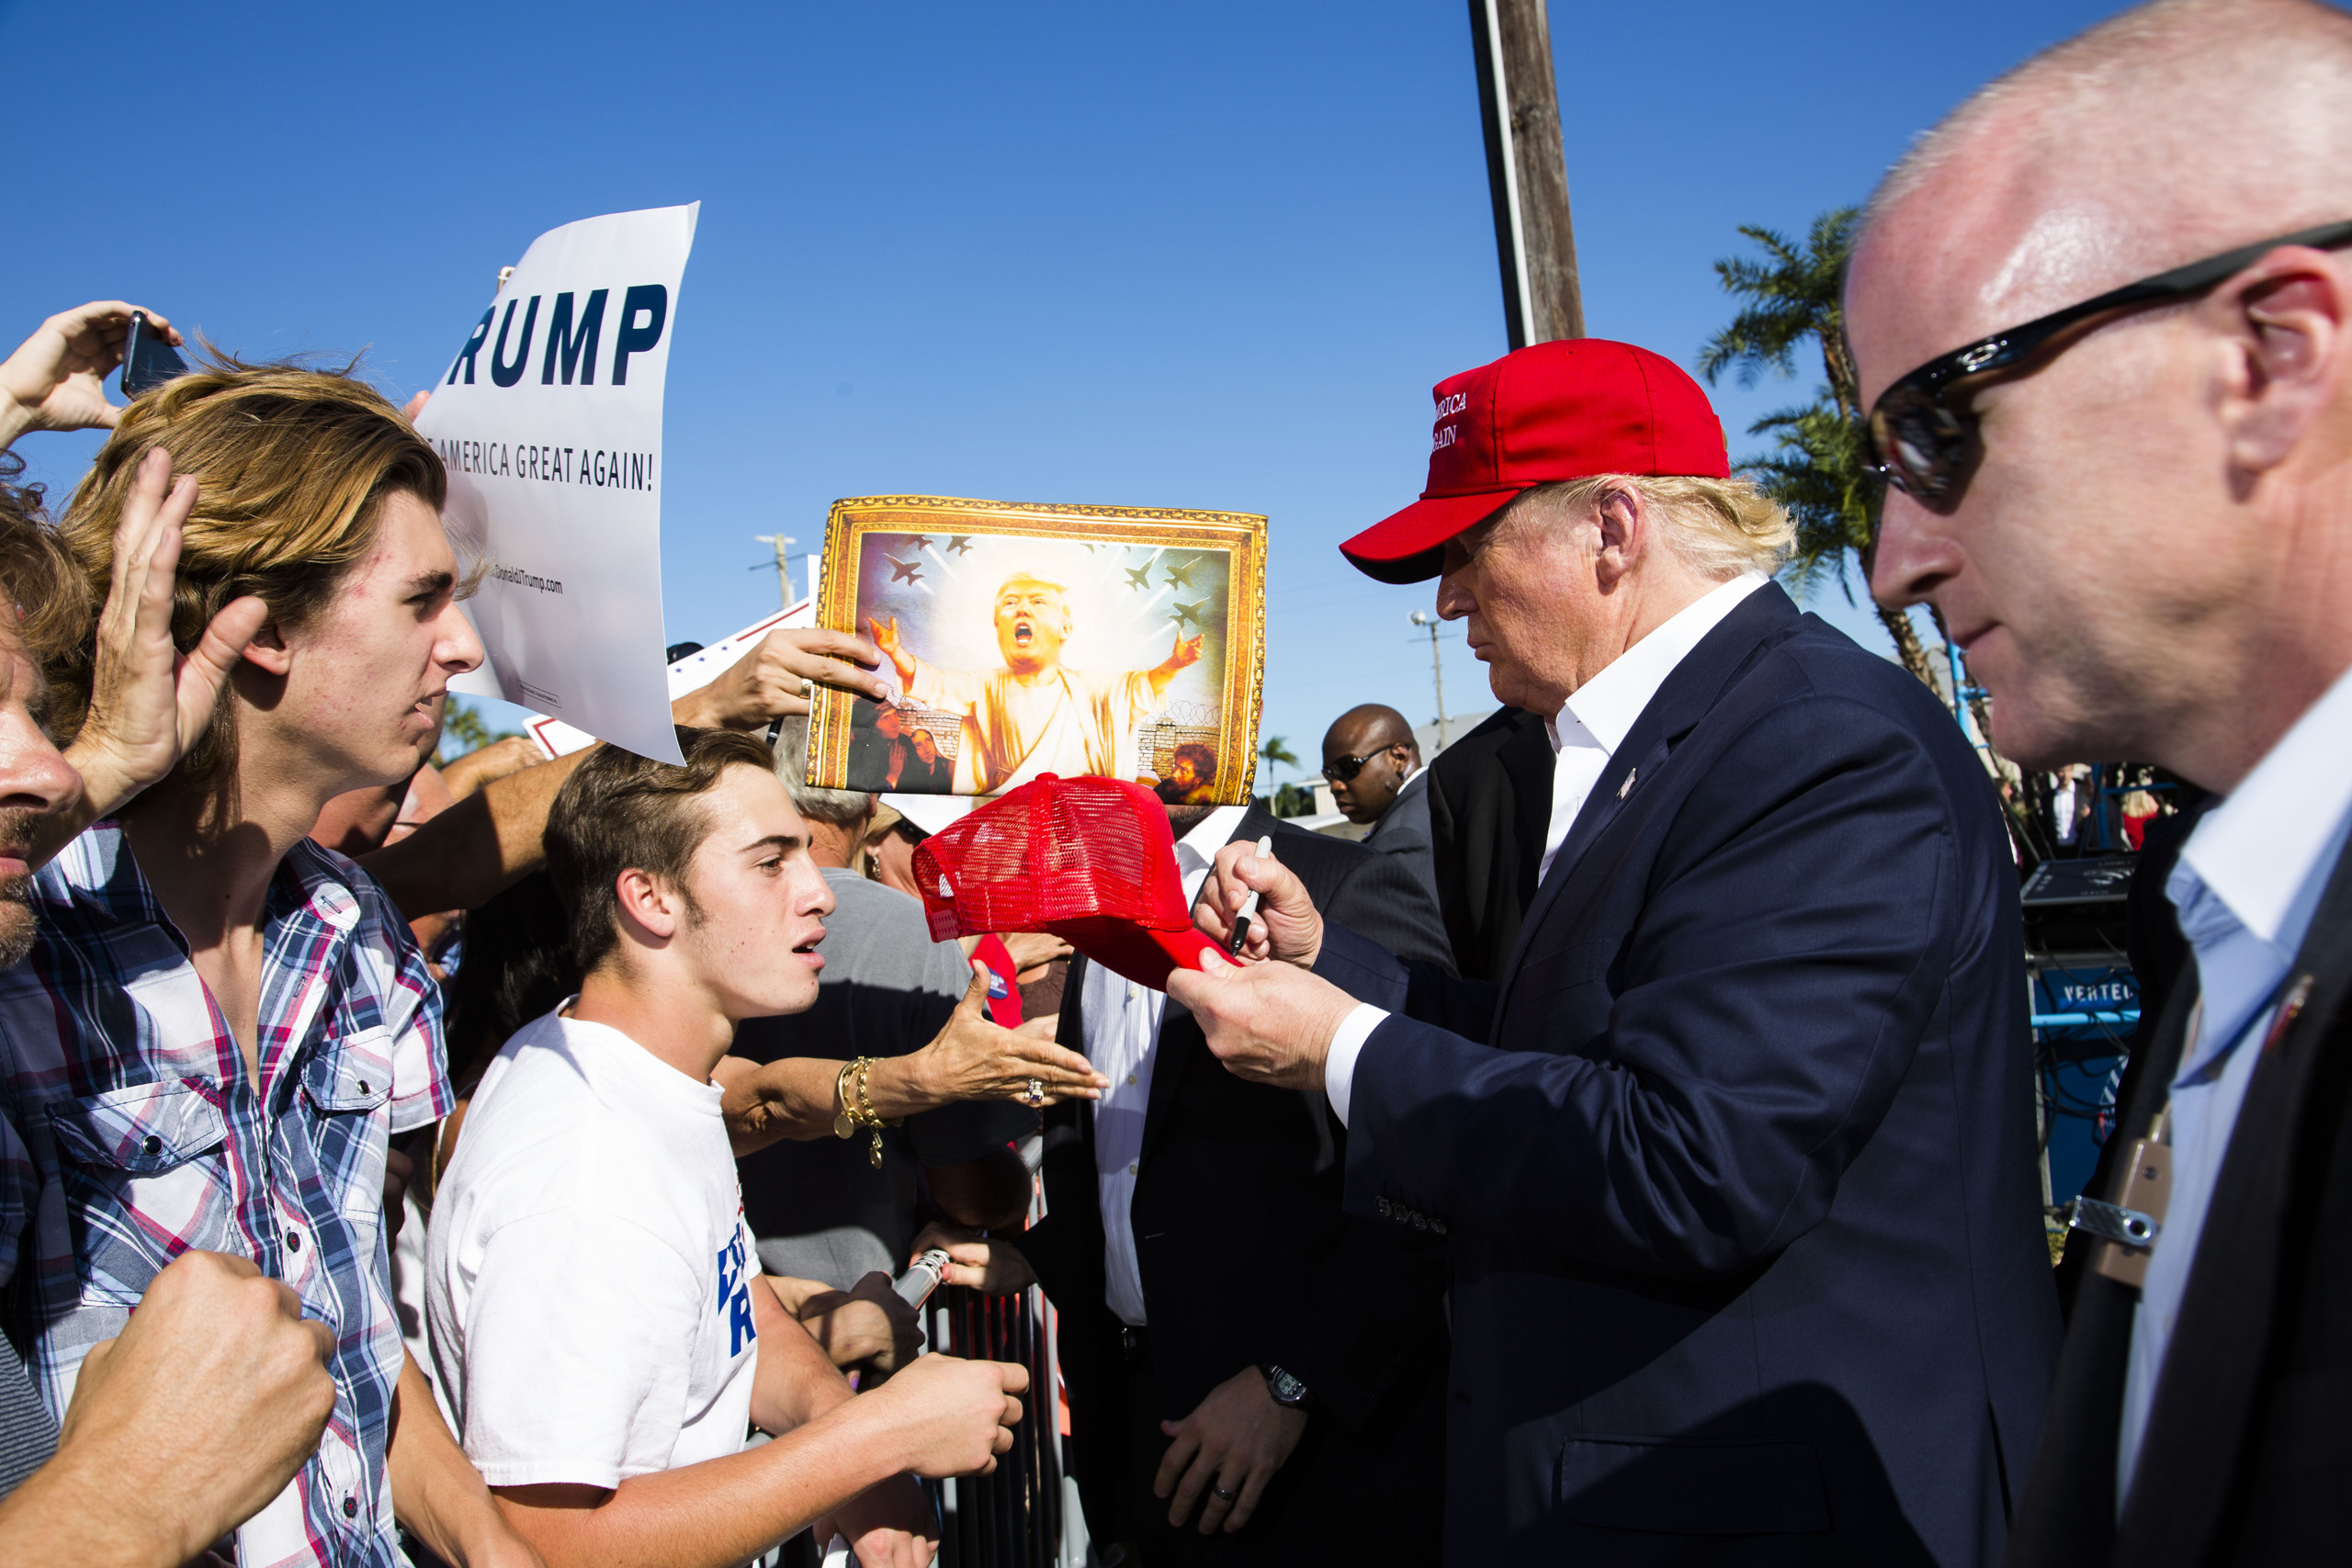 Republican presidential candidate Donald Trump meets with supporters after arriving in his helicopter as a group of children race towards it for ride during a rally in Sarasota, Fla. Nov. 28, 2015.